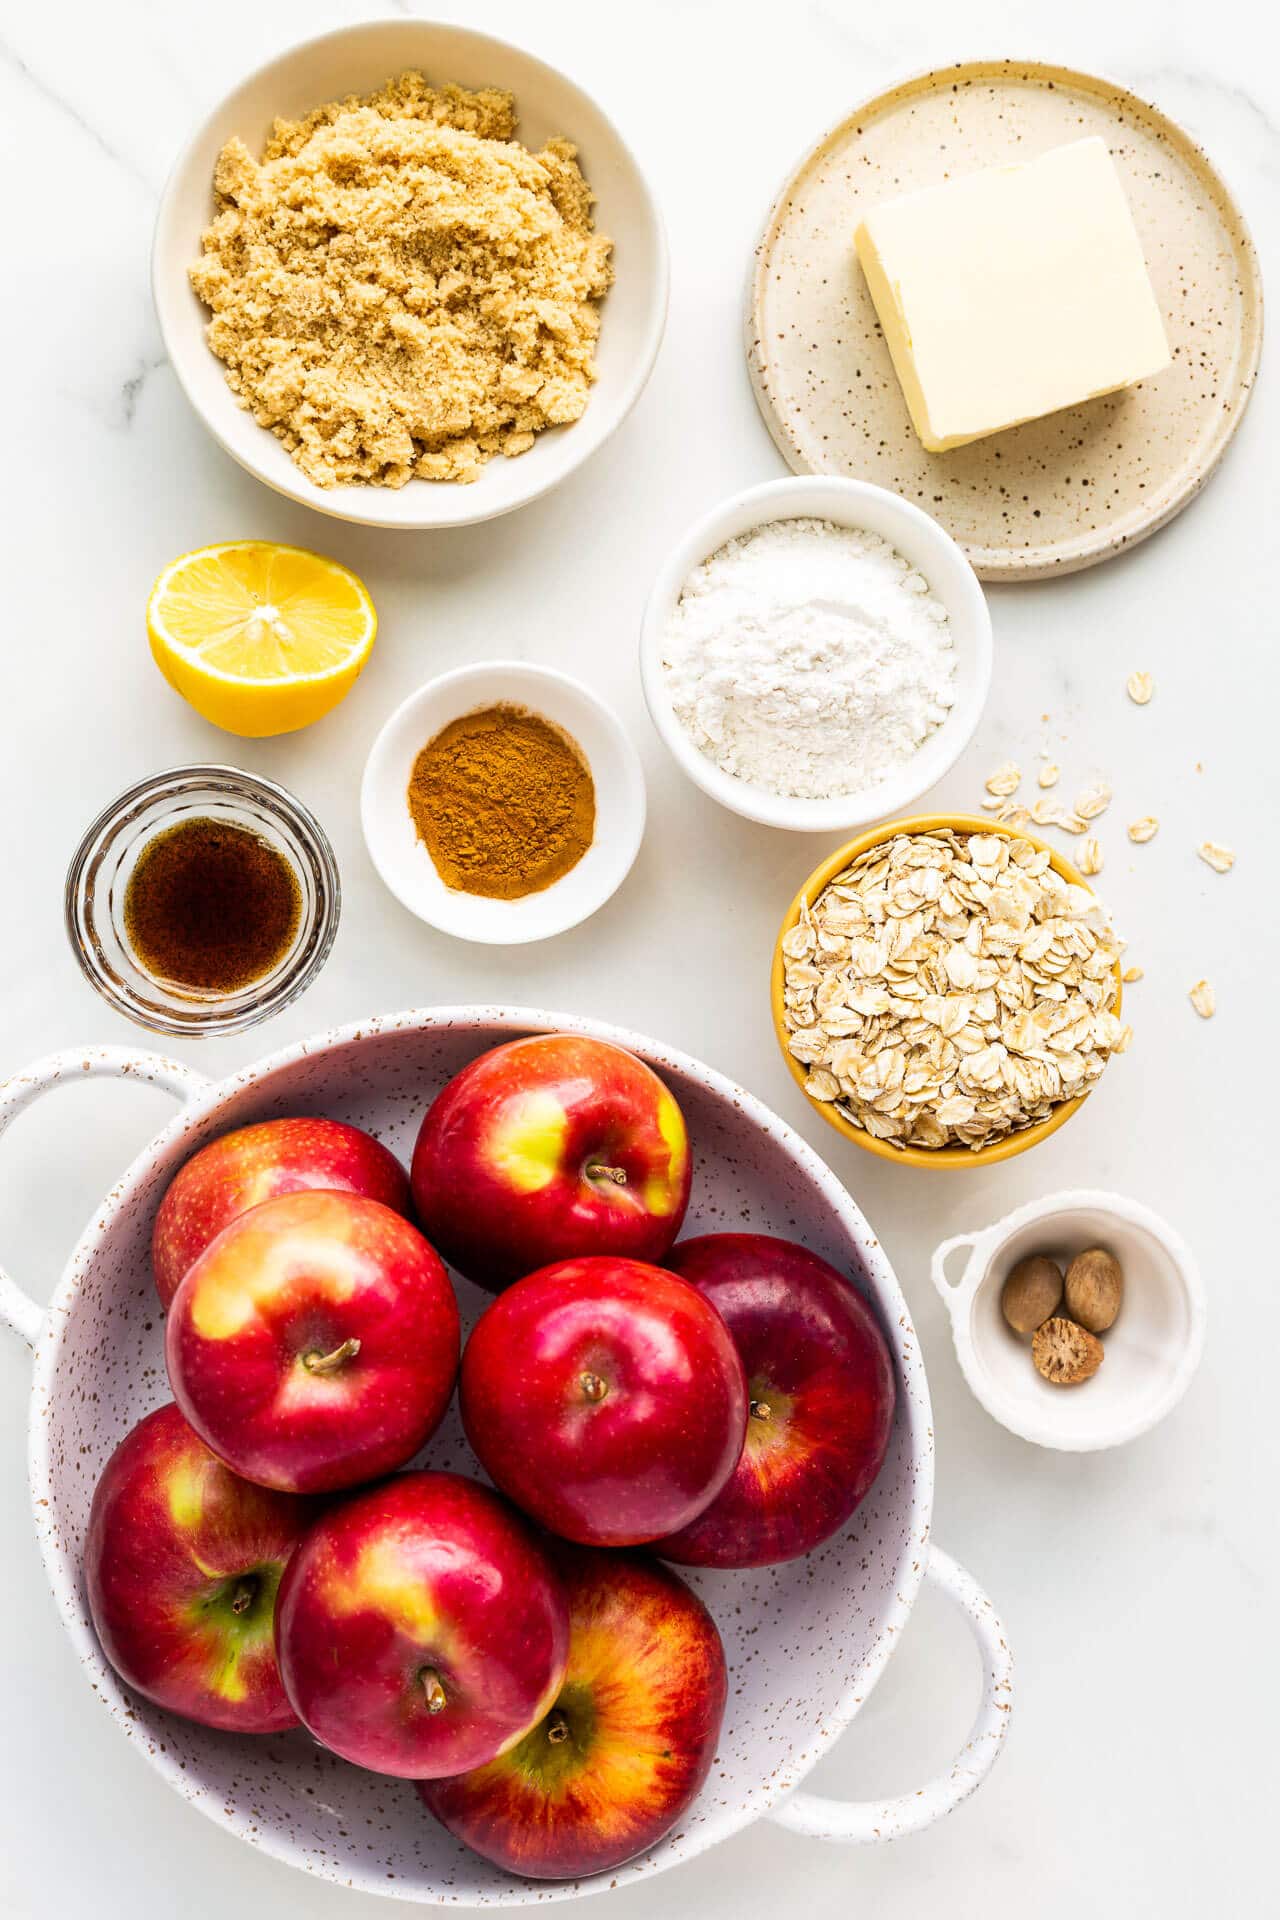 Ingredients to make apple crisp measured out including apples, brown sugar, butter, flour, oats, cinnamon, nutmeg, vanilla bean paste, and a little lemon juice for the apples